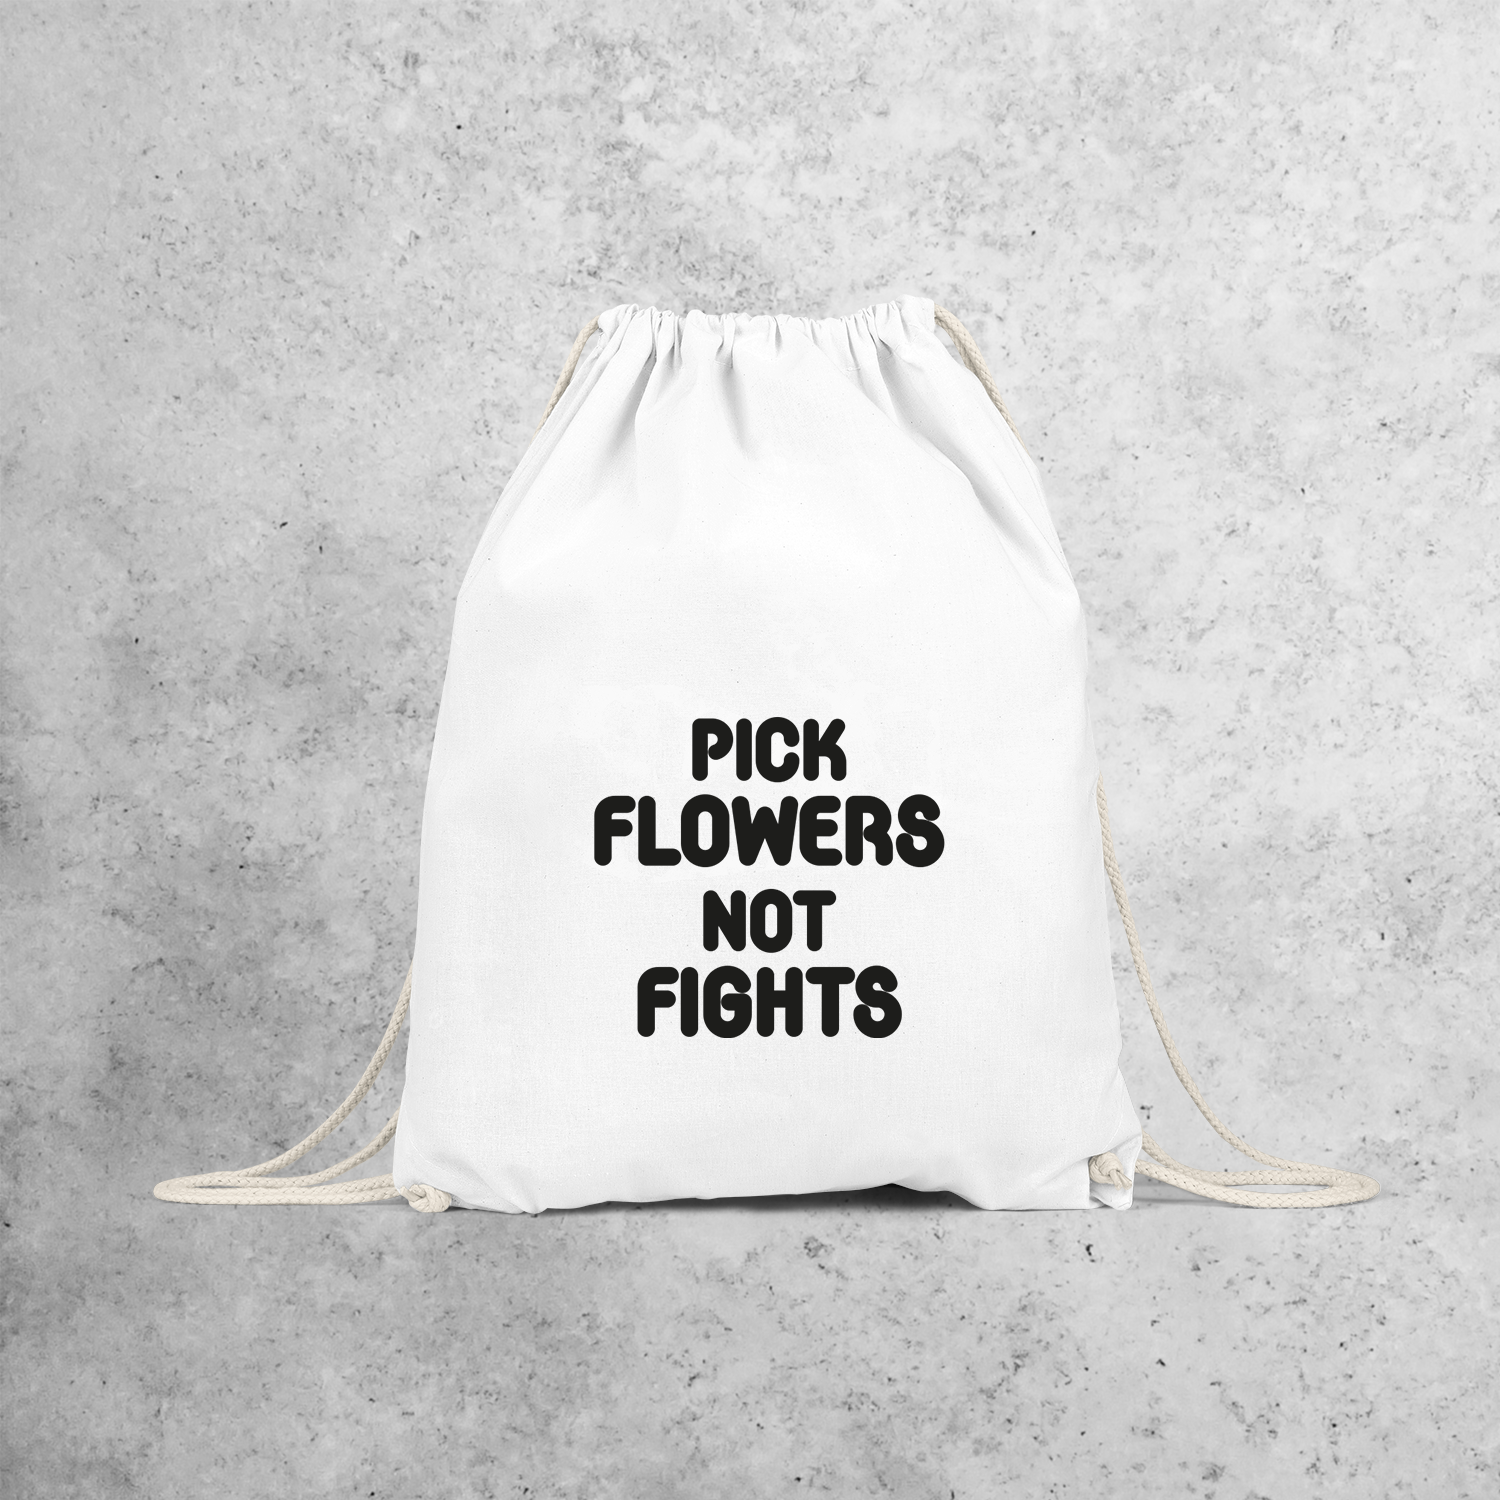 'Pick flowers not fights' backpack